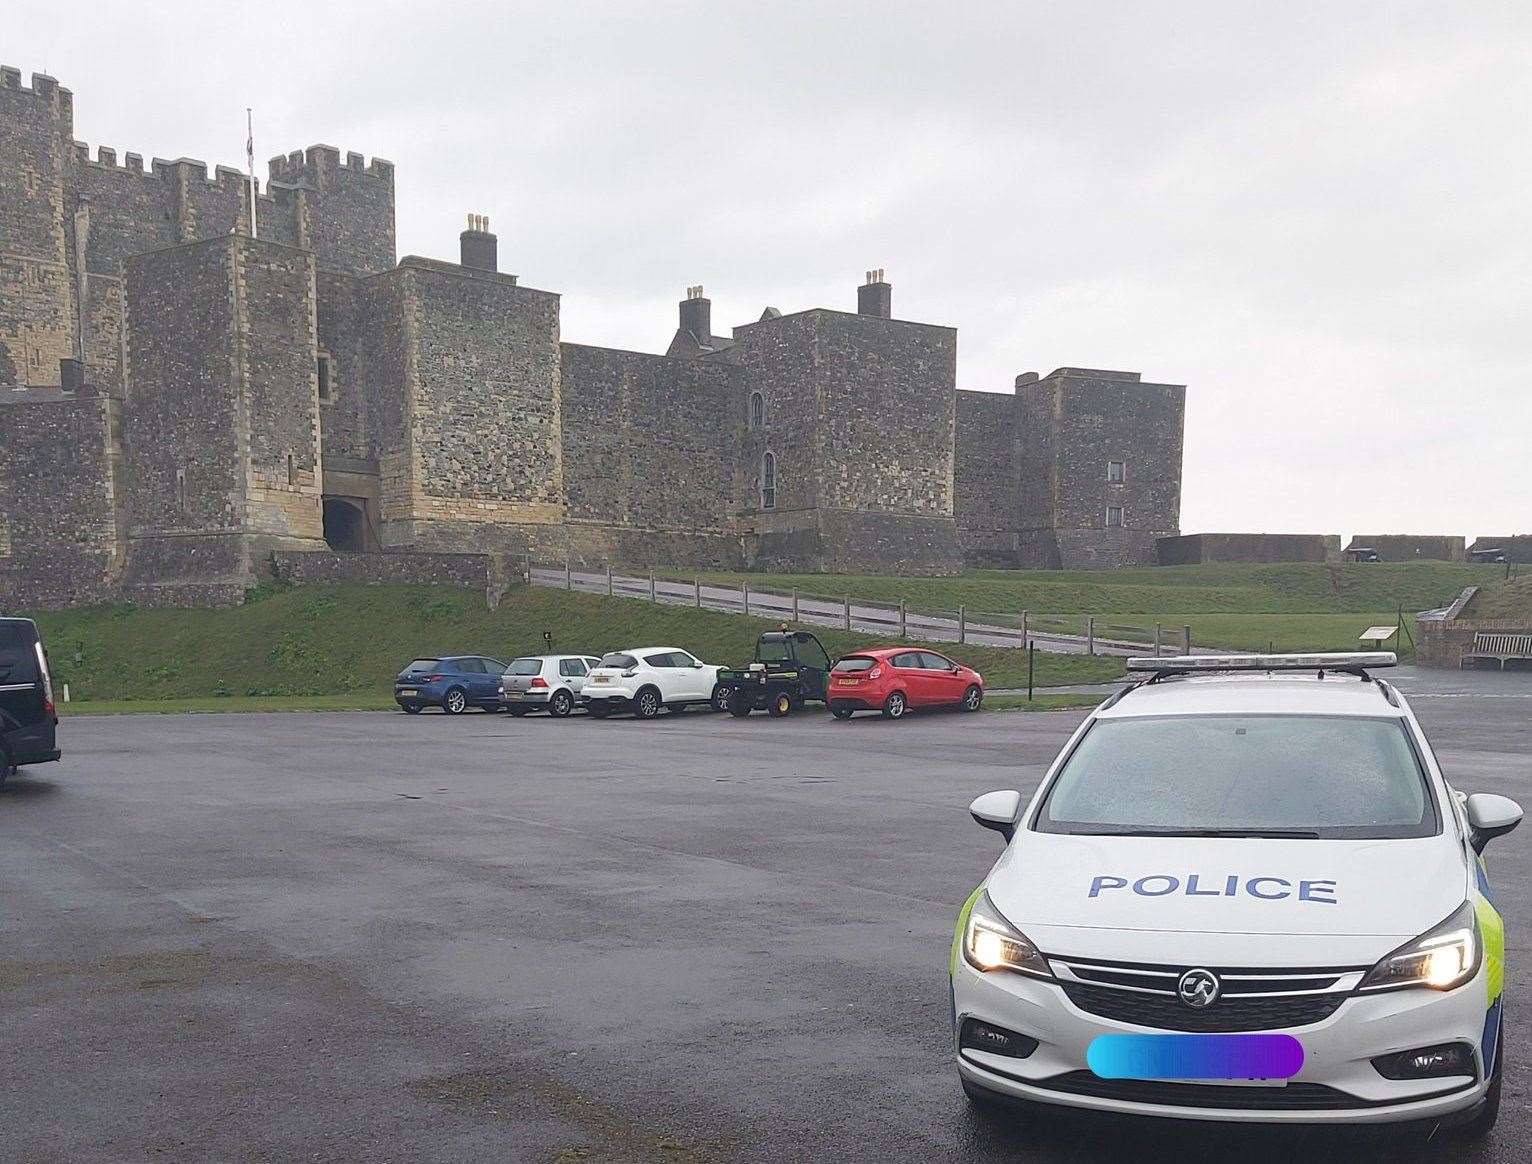 Police shared images of the patrol car in Dover after a man spotted walking along the A2 near Bluewater was suspected of entering the UK illegally. Picture: Kent Police